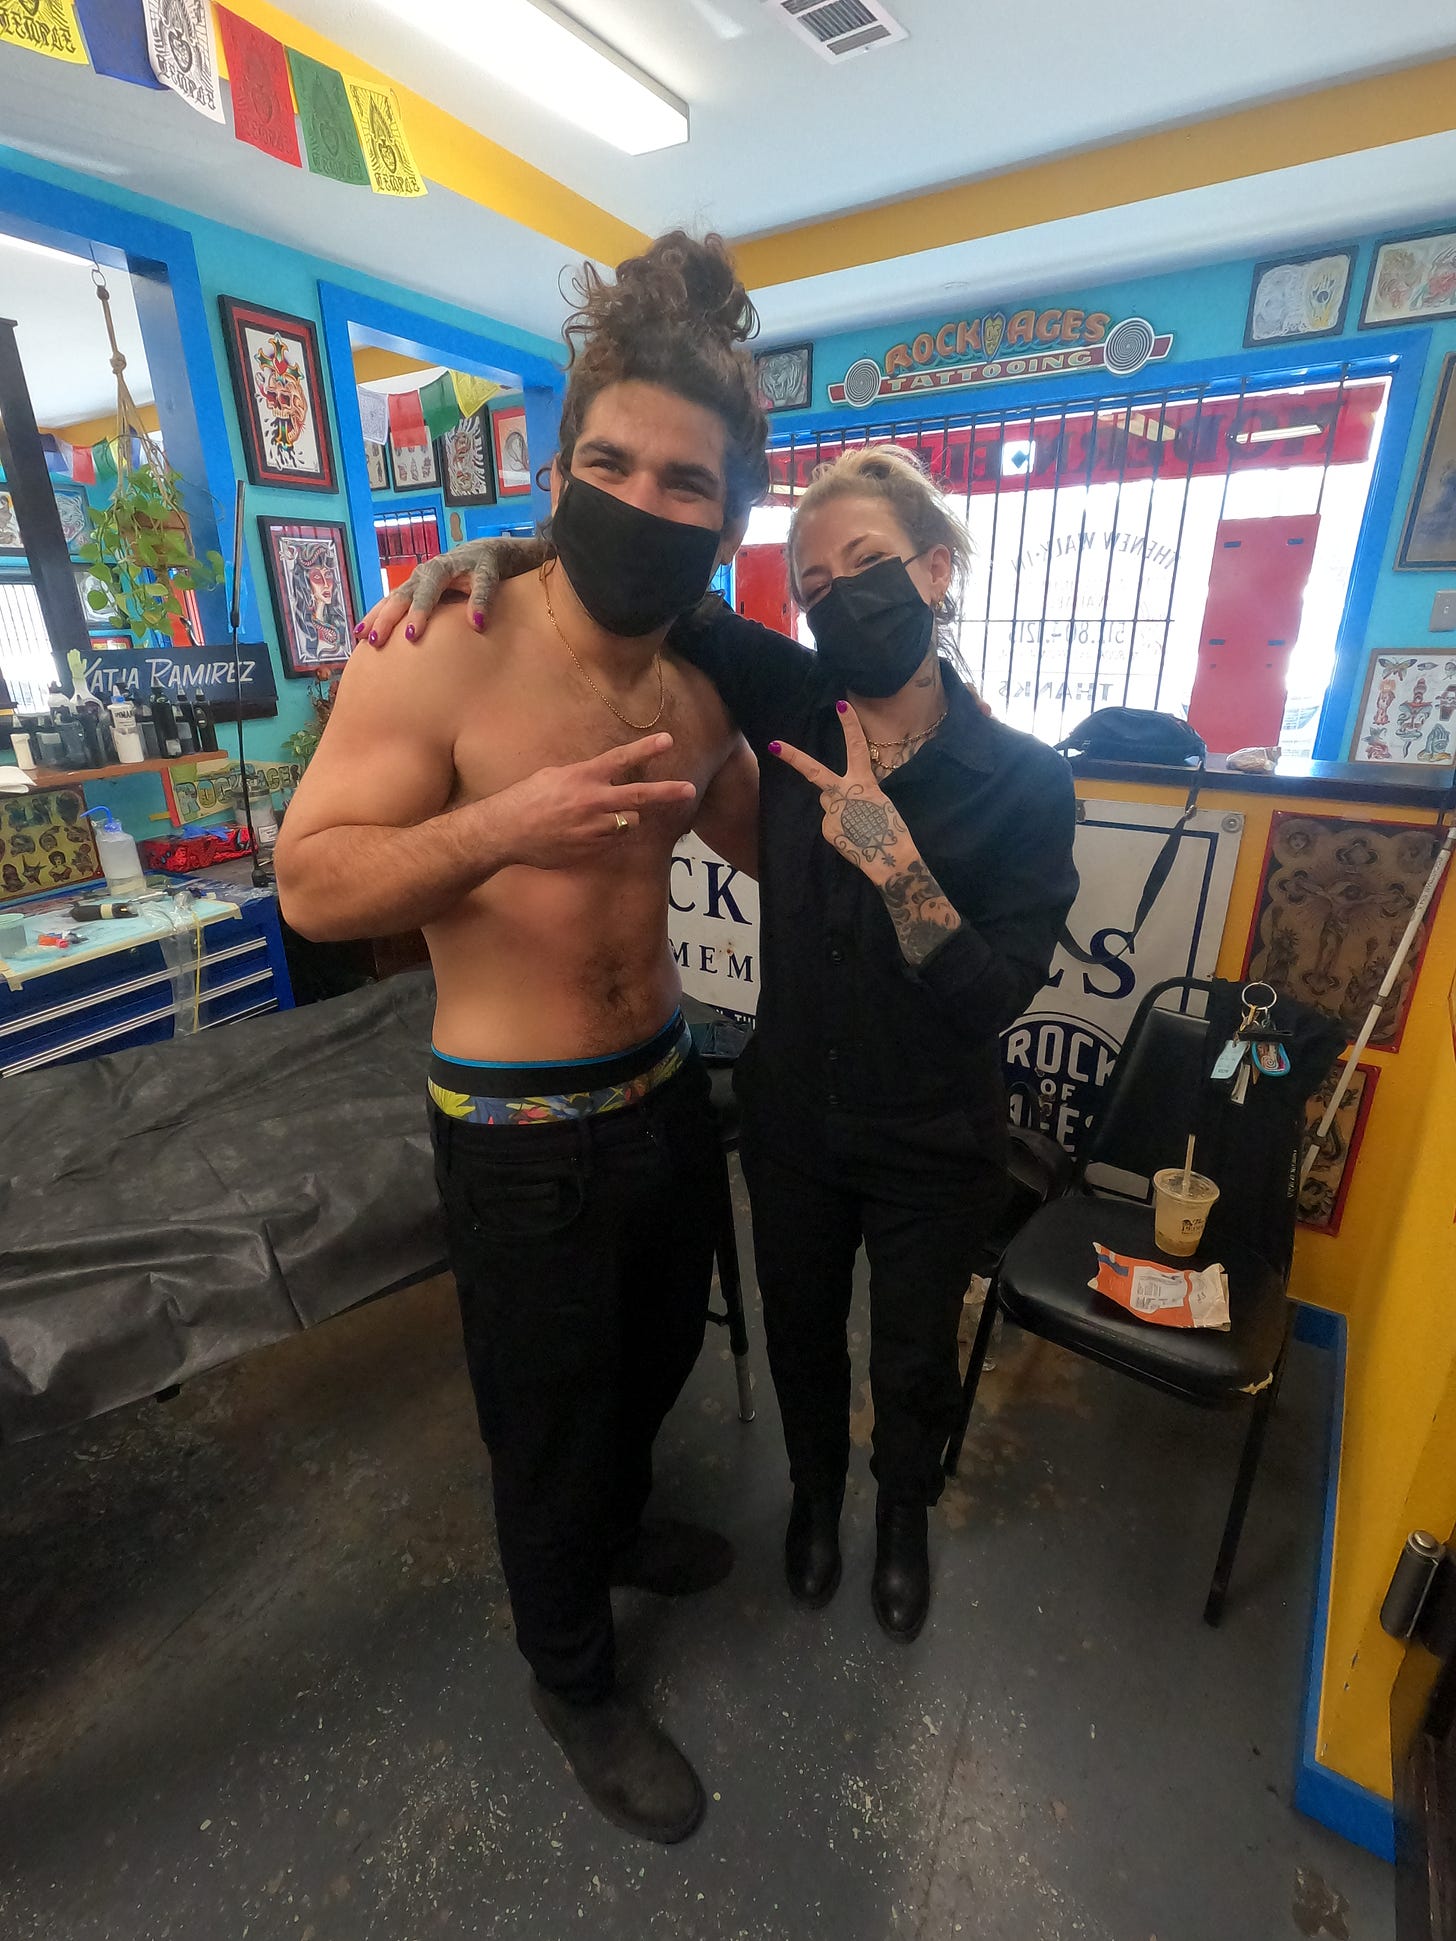 anthony and the tattoo artist hold up peace signs with their hands. Anthony is smiling and has no shirt on